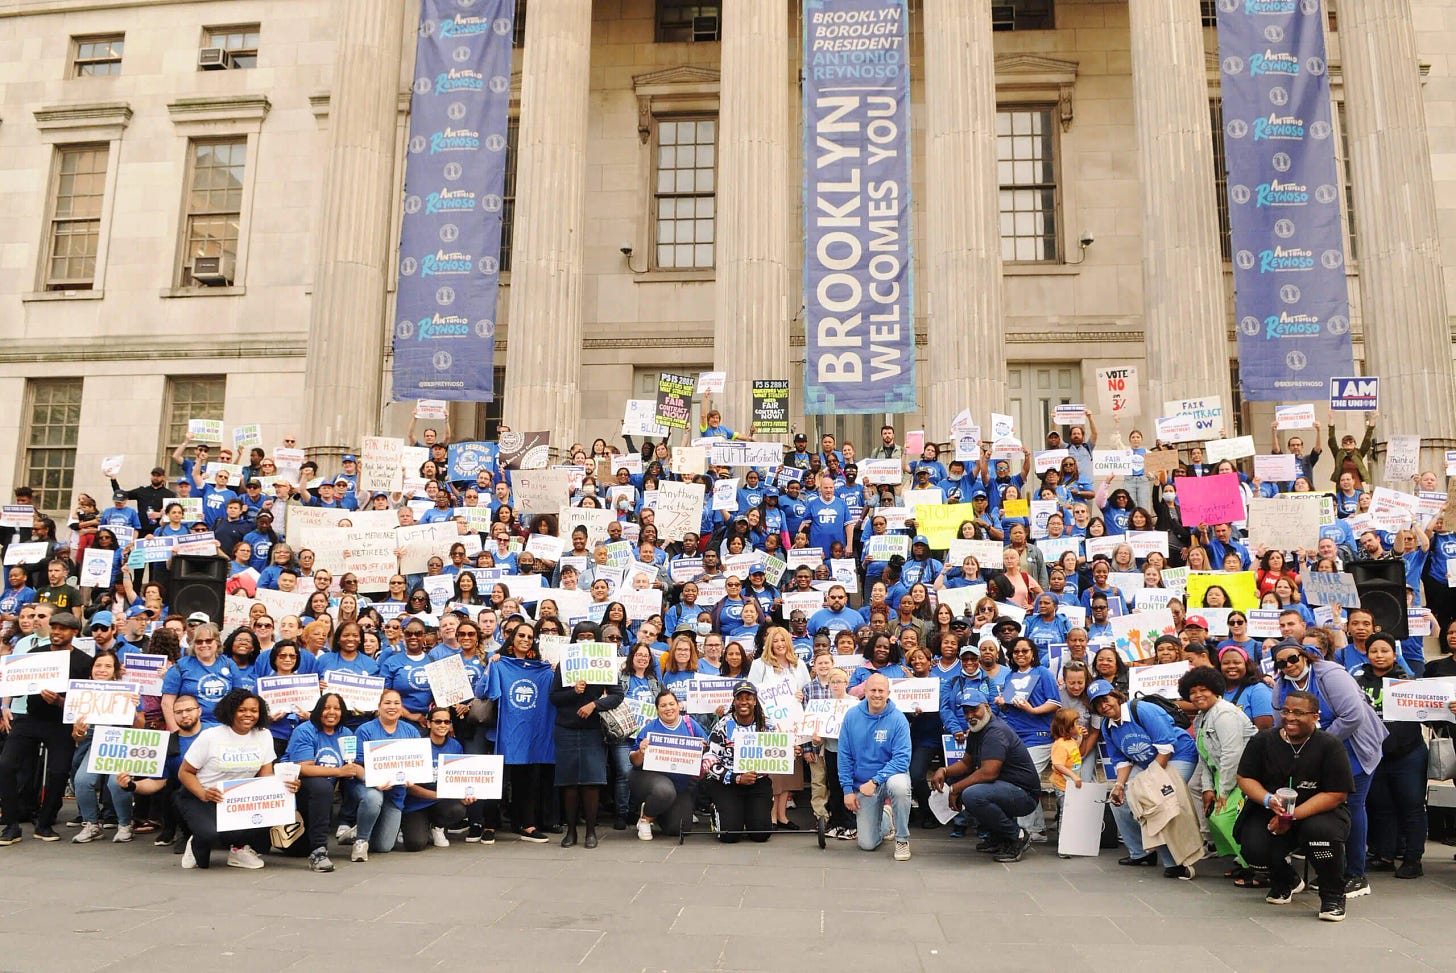 Hundreds of UFT members holding signs demanding a fair contract in front of the Brooklyn Borough Hall building.